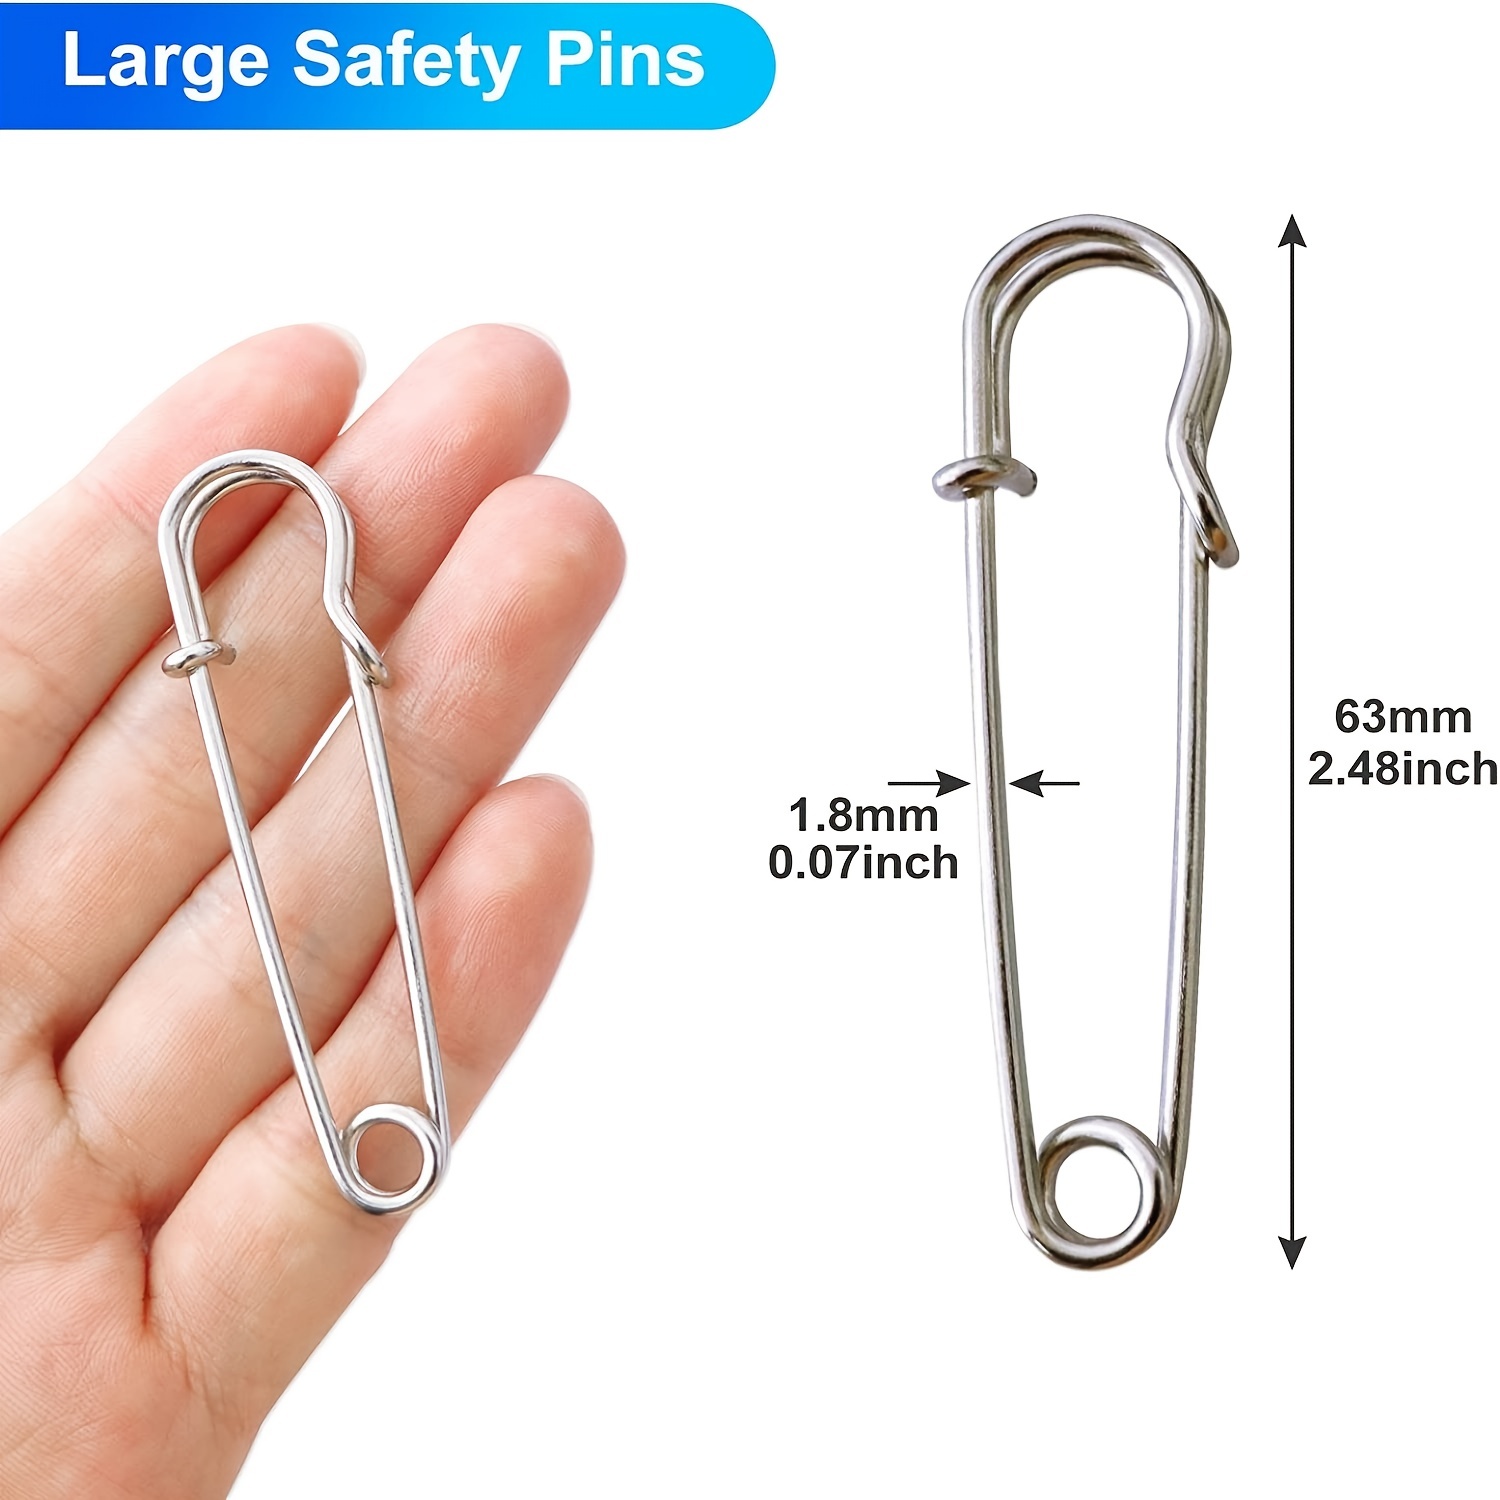 10PCS/Set Safety Pins Large Heavy Duty Safety Pin 3 Inch Blanket